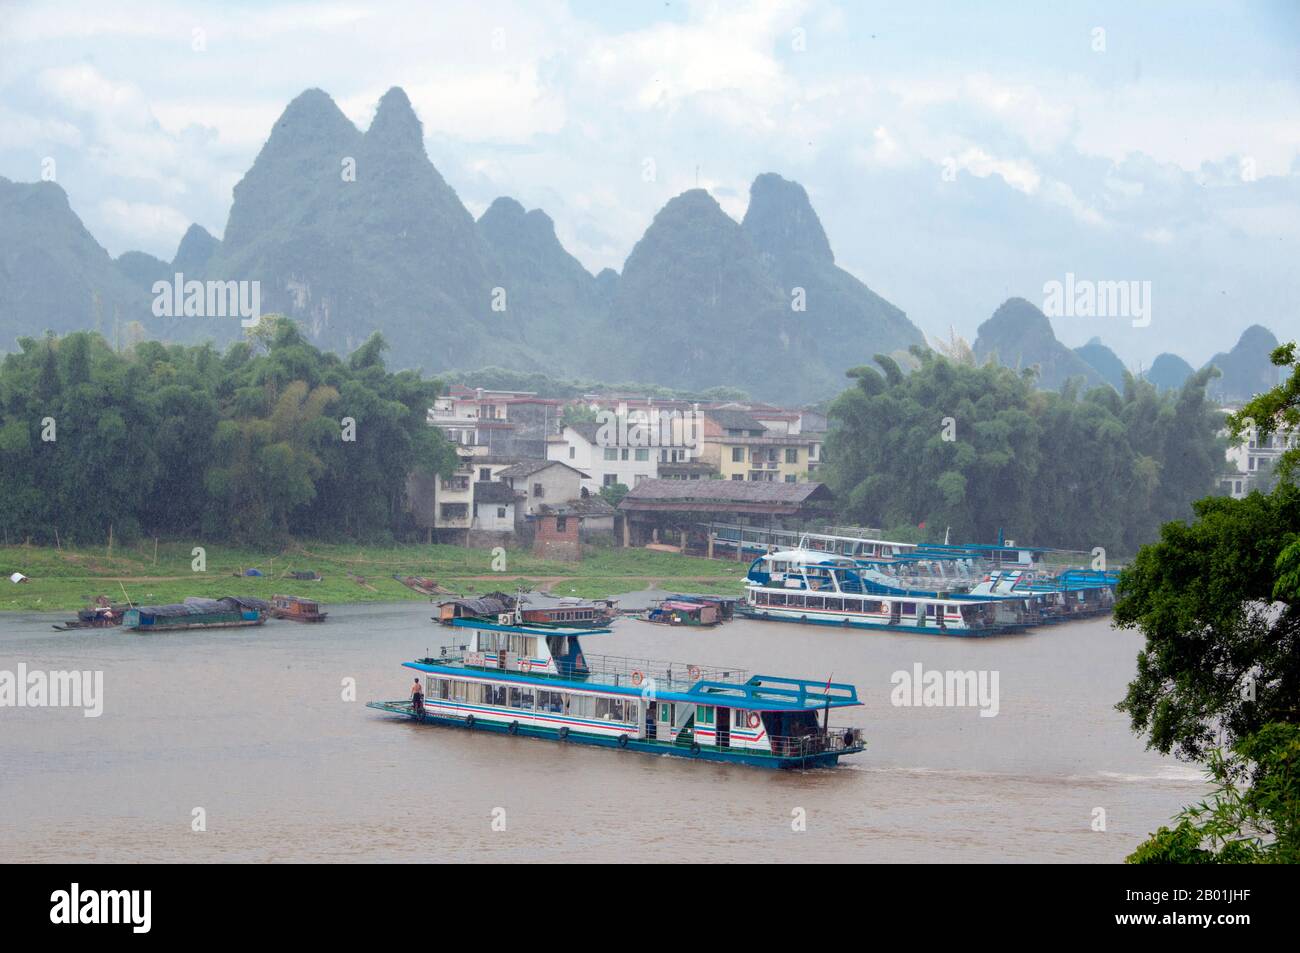 China: Boats on the Li River at Yangshuo, near Guilin, Guangxi Province.  Yangshuo is rightly famous for its dramatic scenery. It lies on the west bank of the Li River (Lijiang) and is just 60 kms downstream from Guilin. Over recent years it has become a popular destination with tourists whilst also retaining its small river town feel.  Guilin is the scene of China’s most famous landscapes, inspiring thousands of paintings over many centuries. The ‘finest mountains and rivers under heaven’ are so inspiring that poets, artists and tourists have made this China’s number one natural attraction. Stock Photo